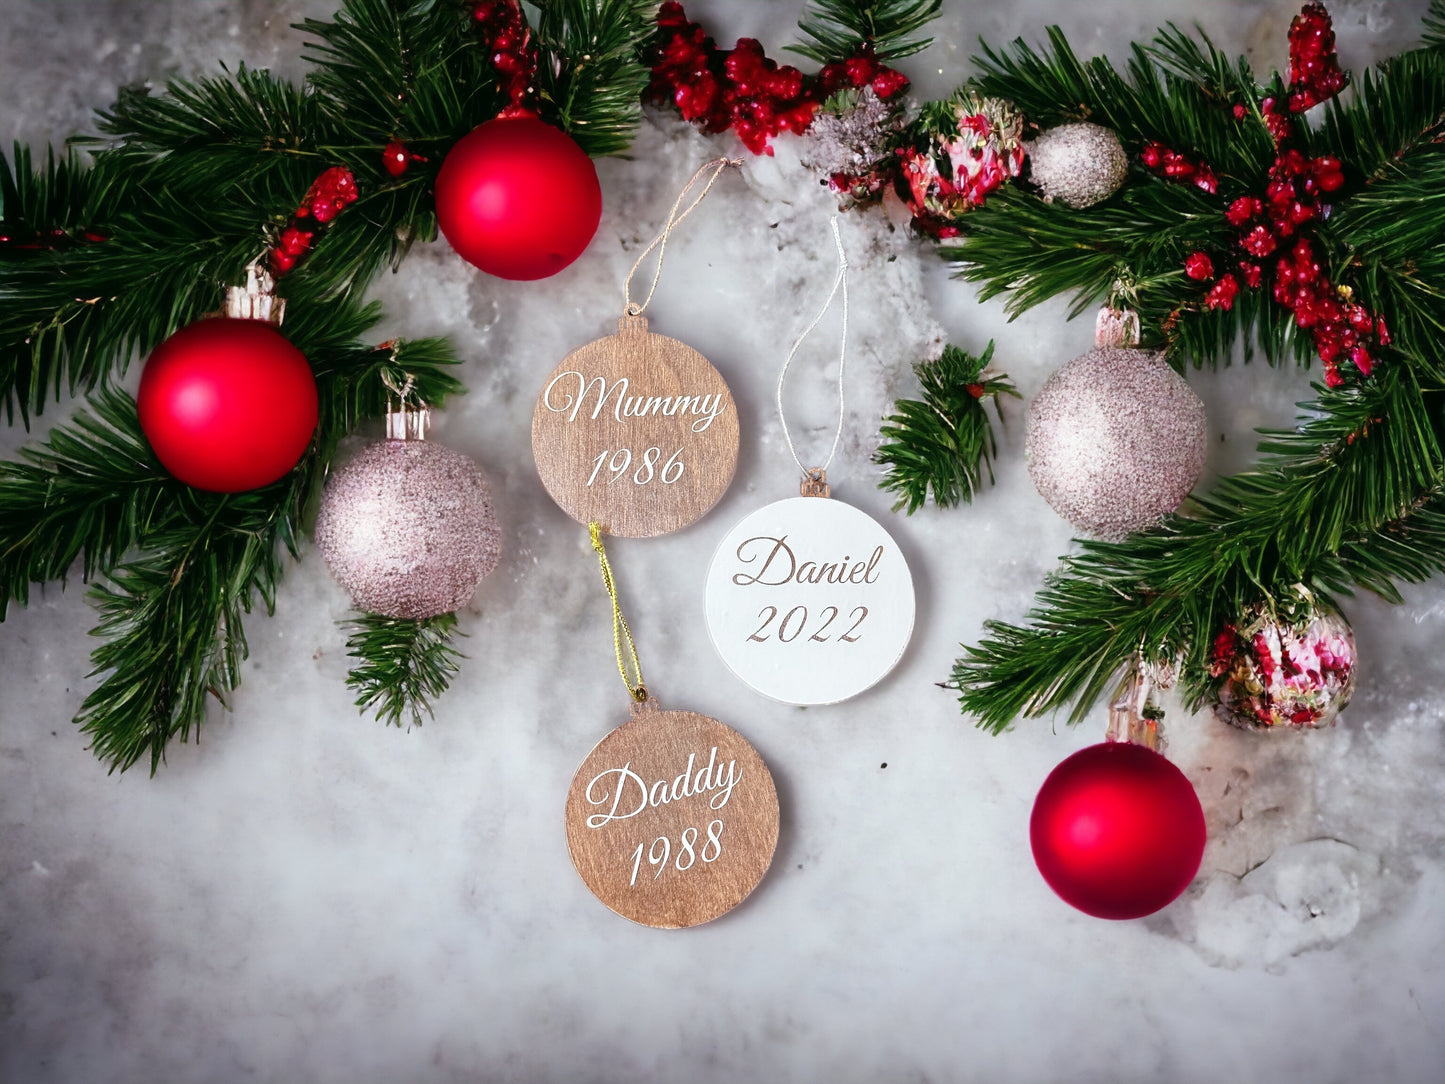 Personalised wooden bauble